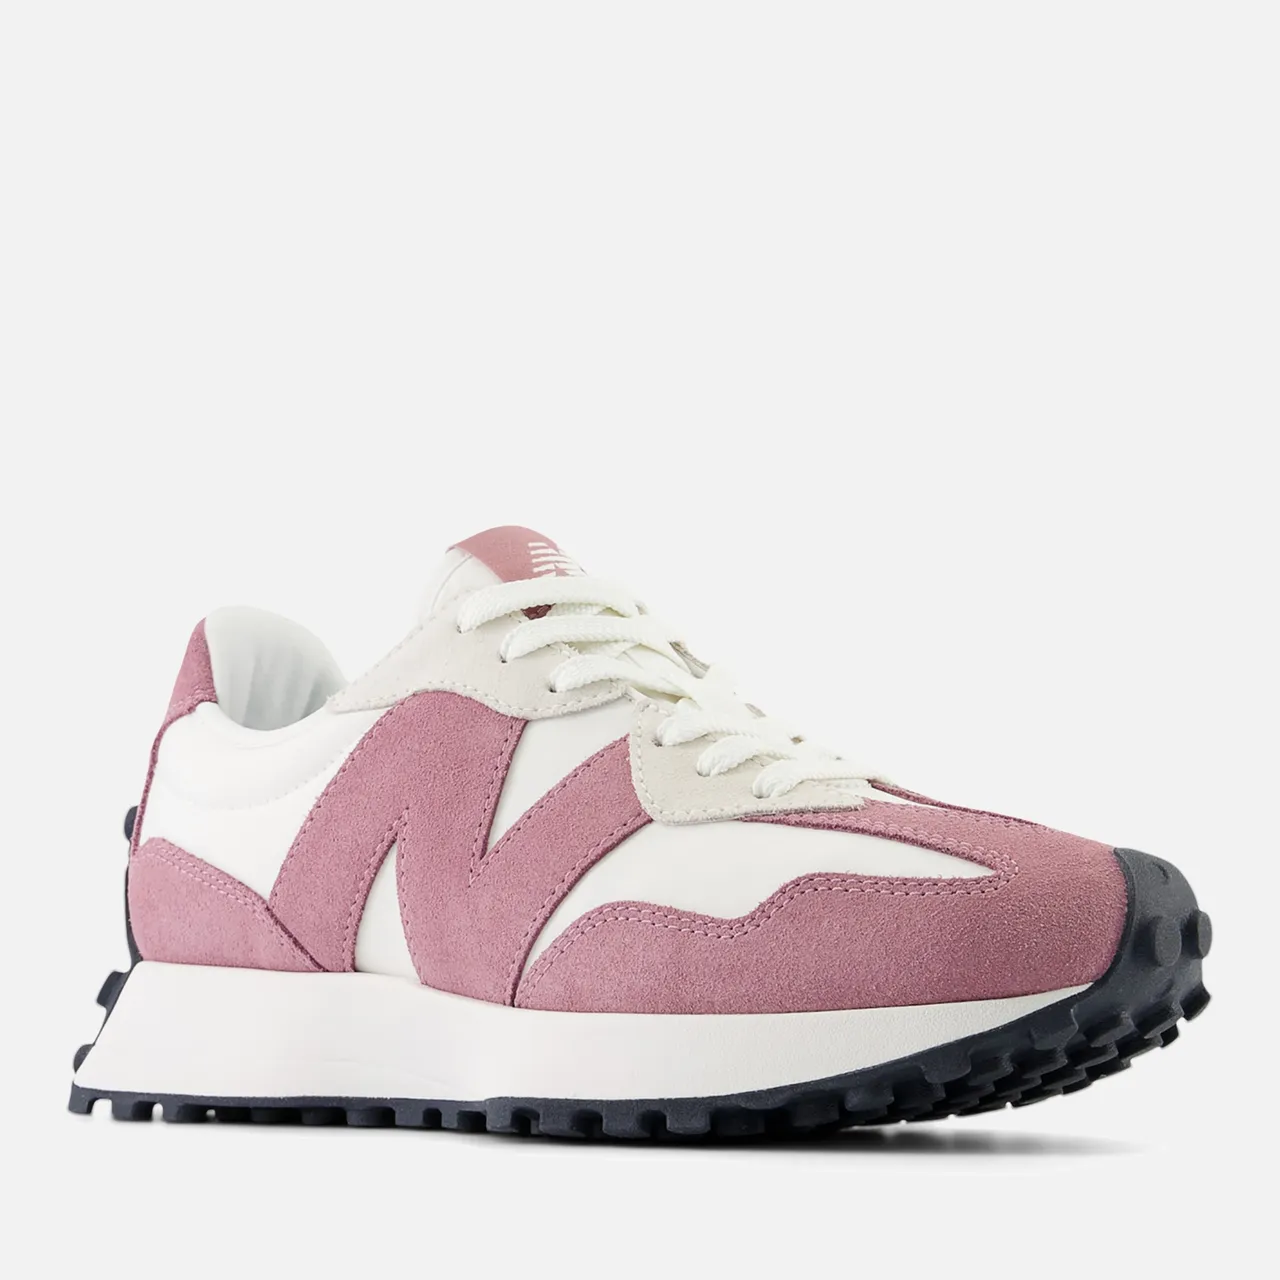 New Balance Women's 327 Suede Trainers - UK